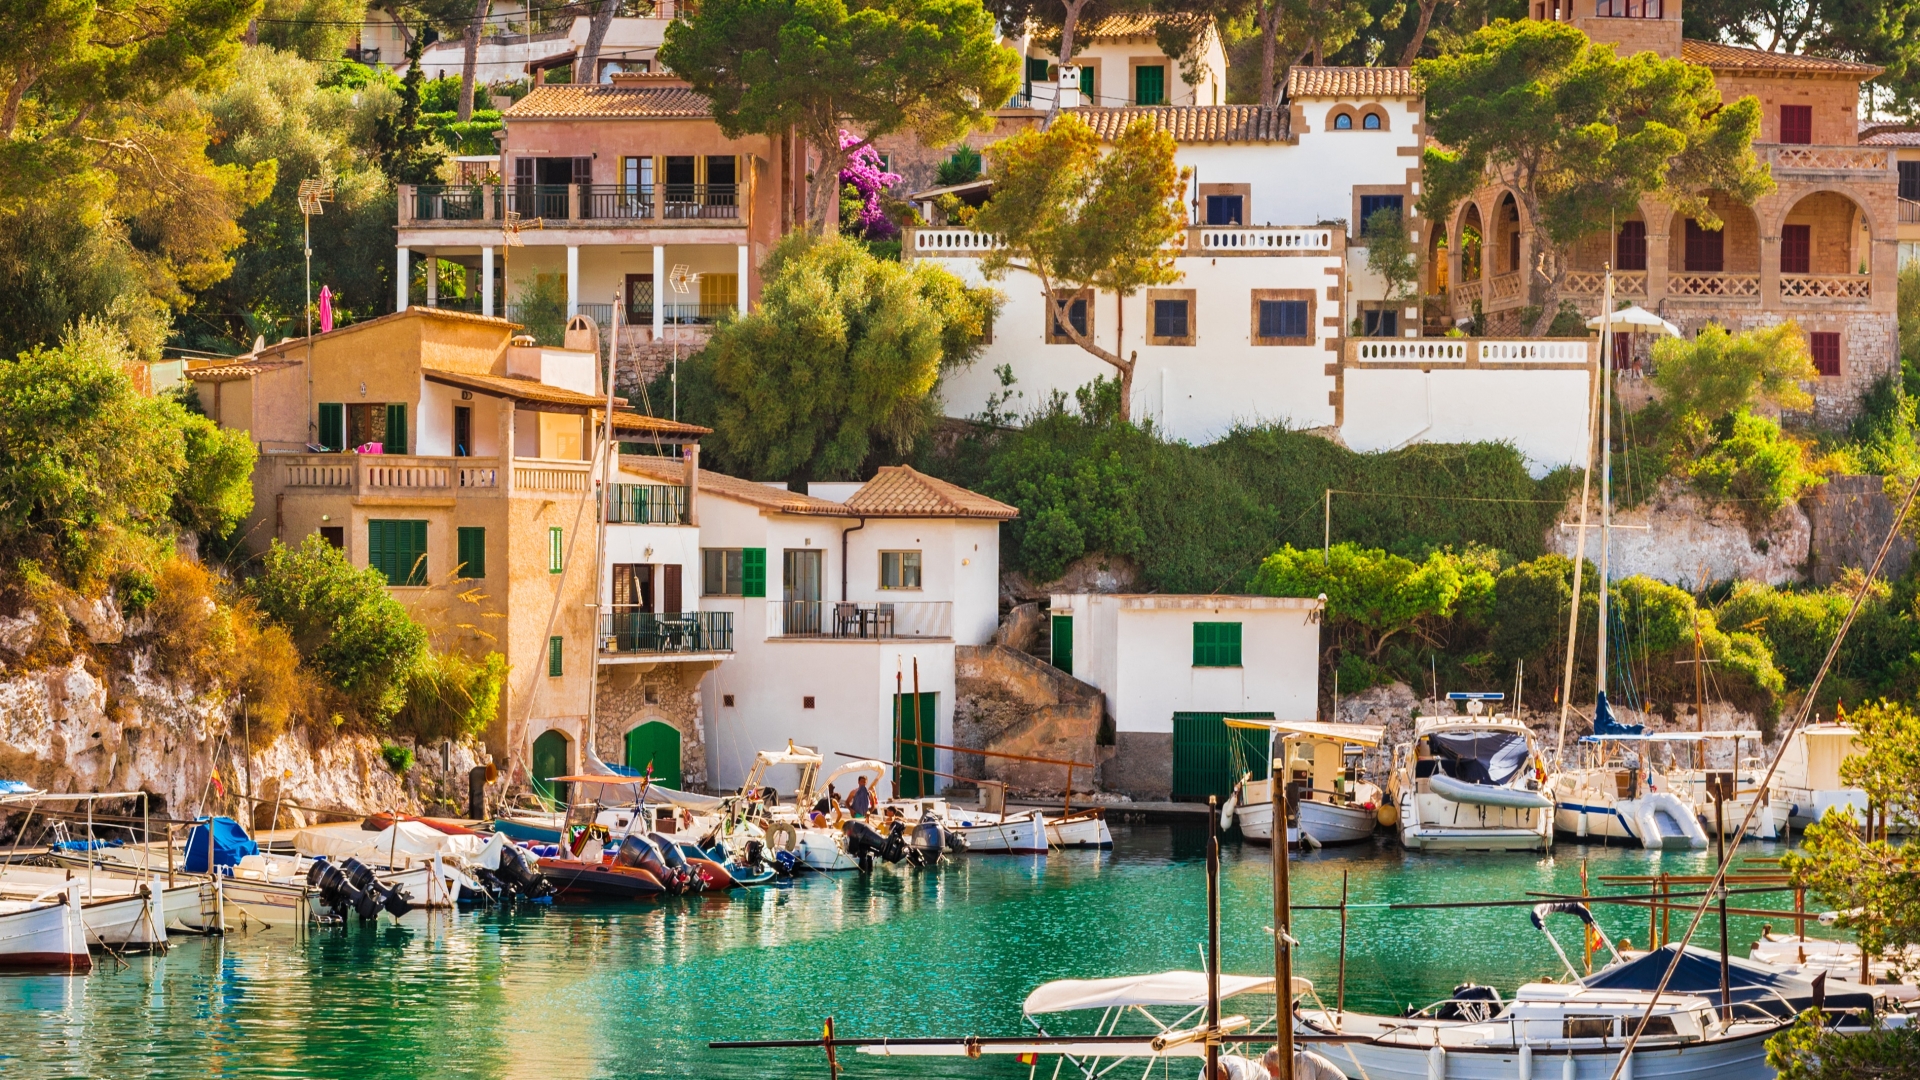 Majorca has more to offer than just party-central Magaluf. Why you should go to the quiet village where only the locals go